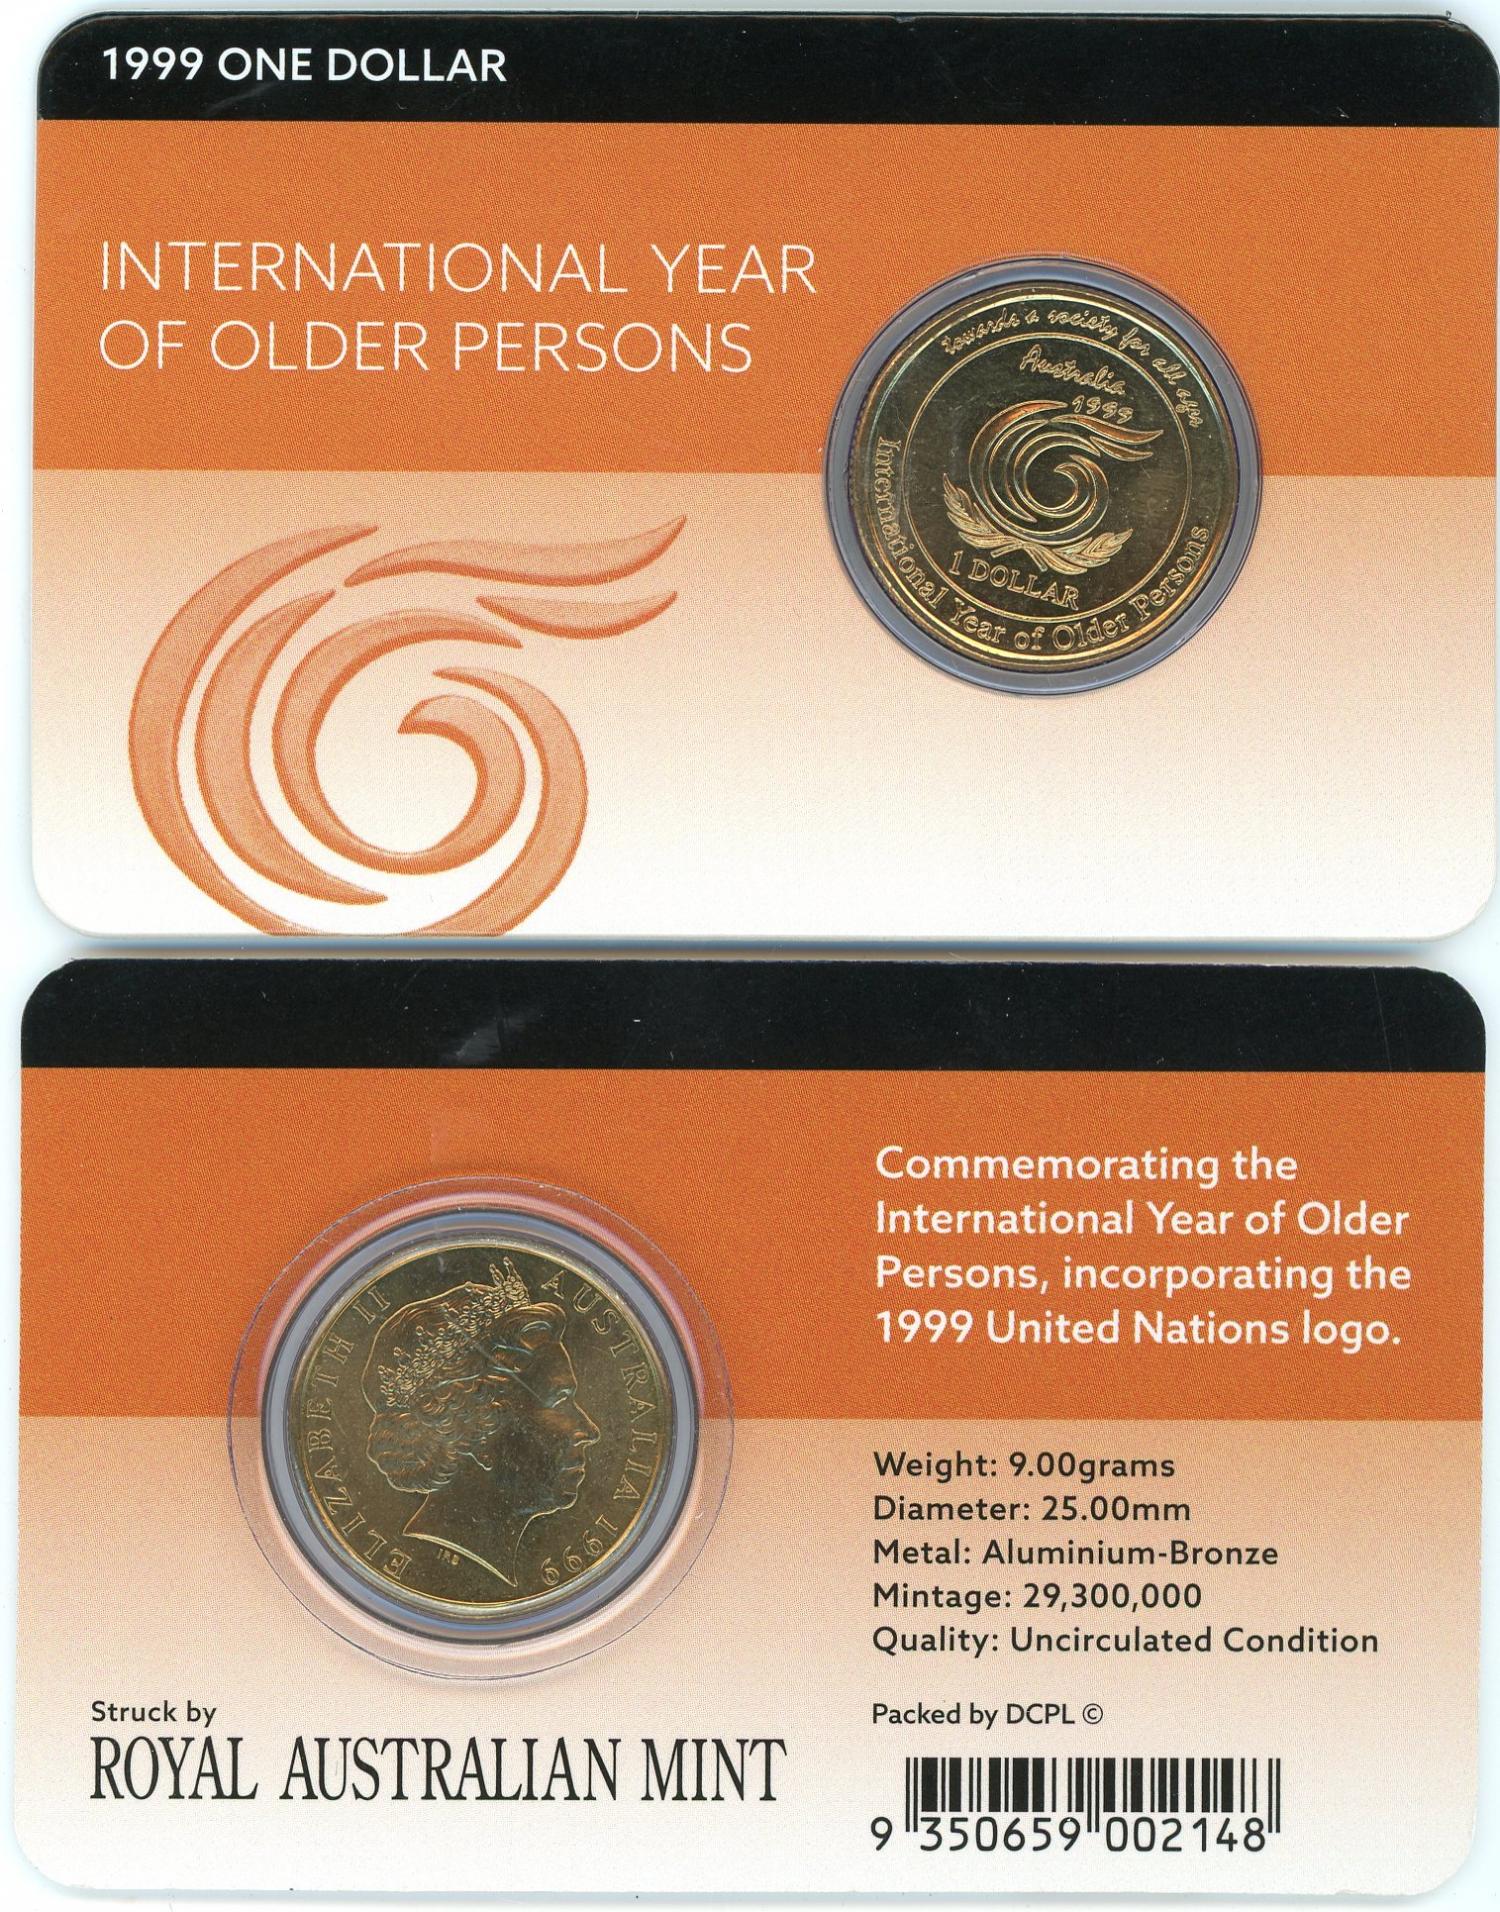 Thumbnail for 1999 $1 International Year of Older Persons